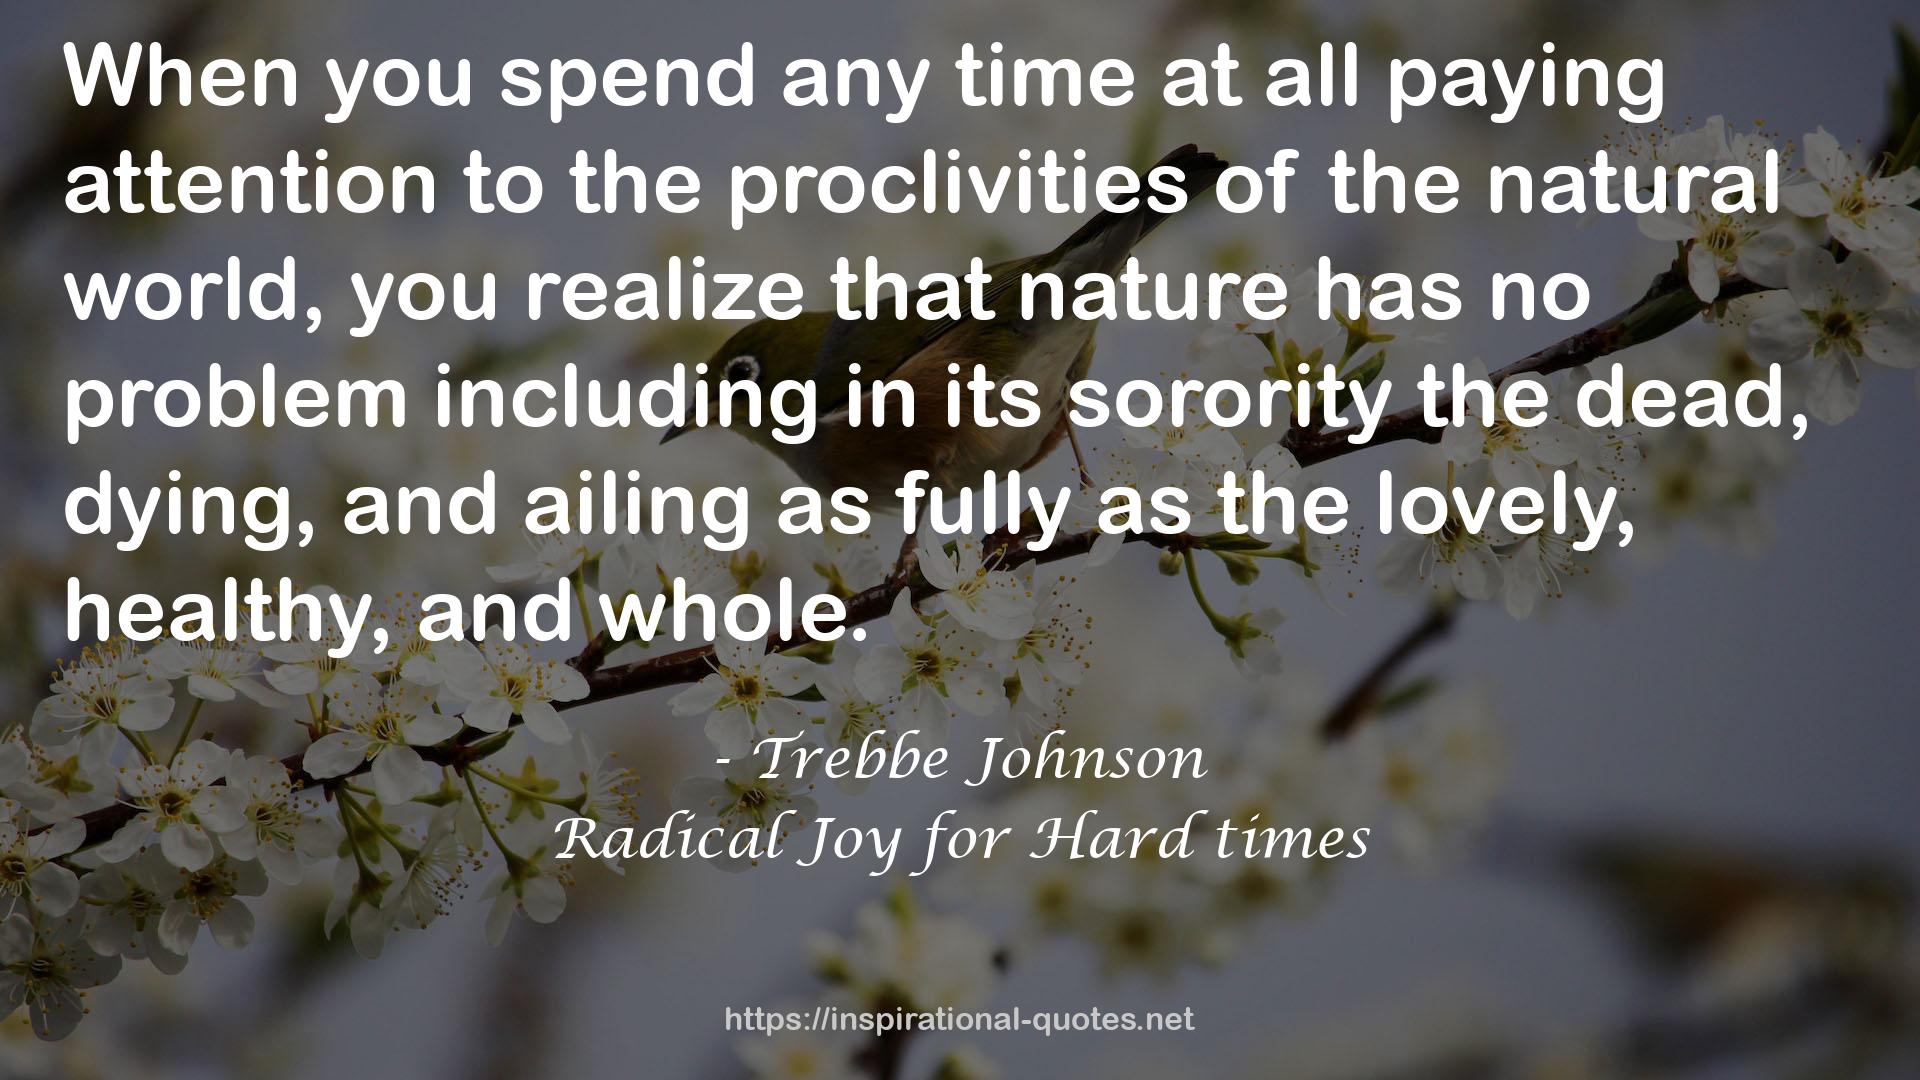 Radical Joy for Hard times QUOTES